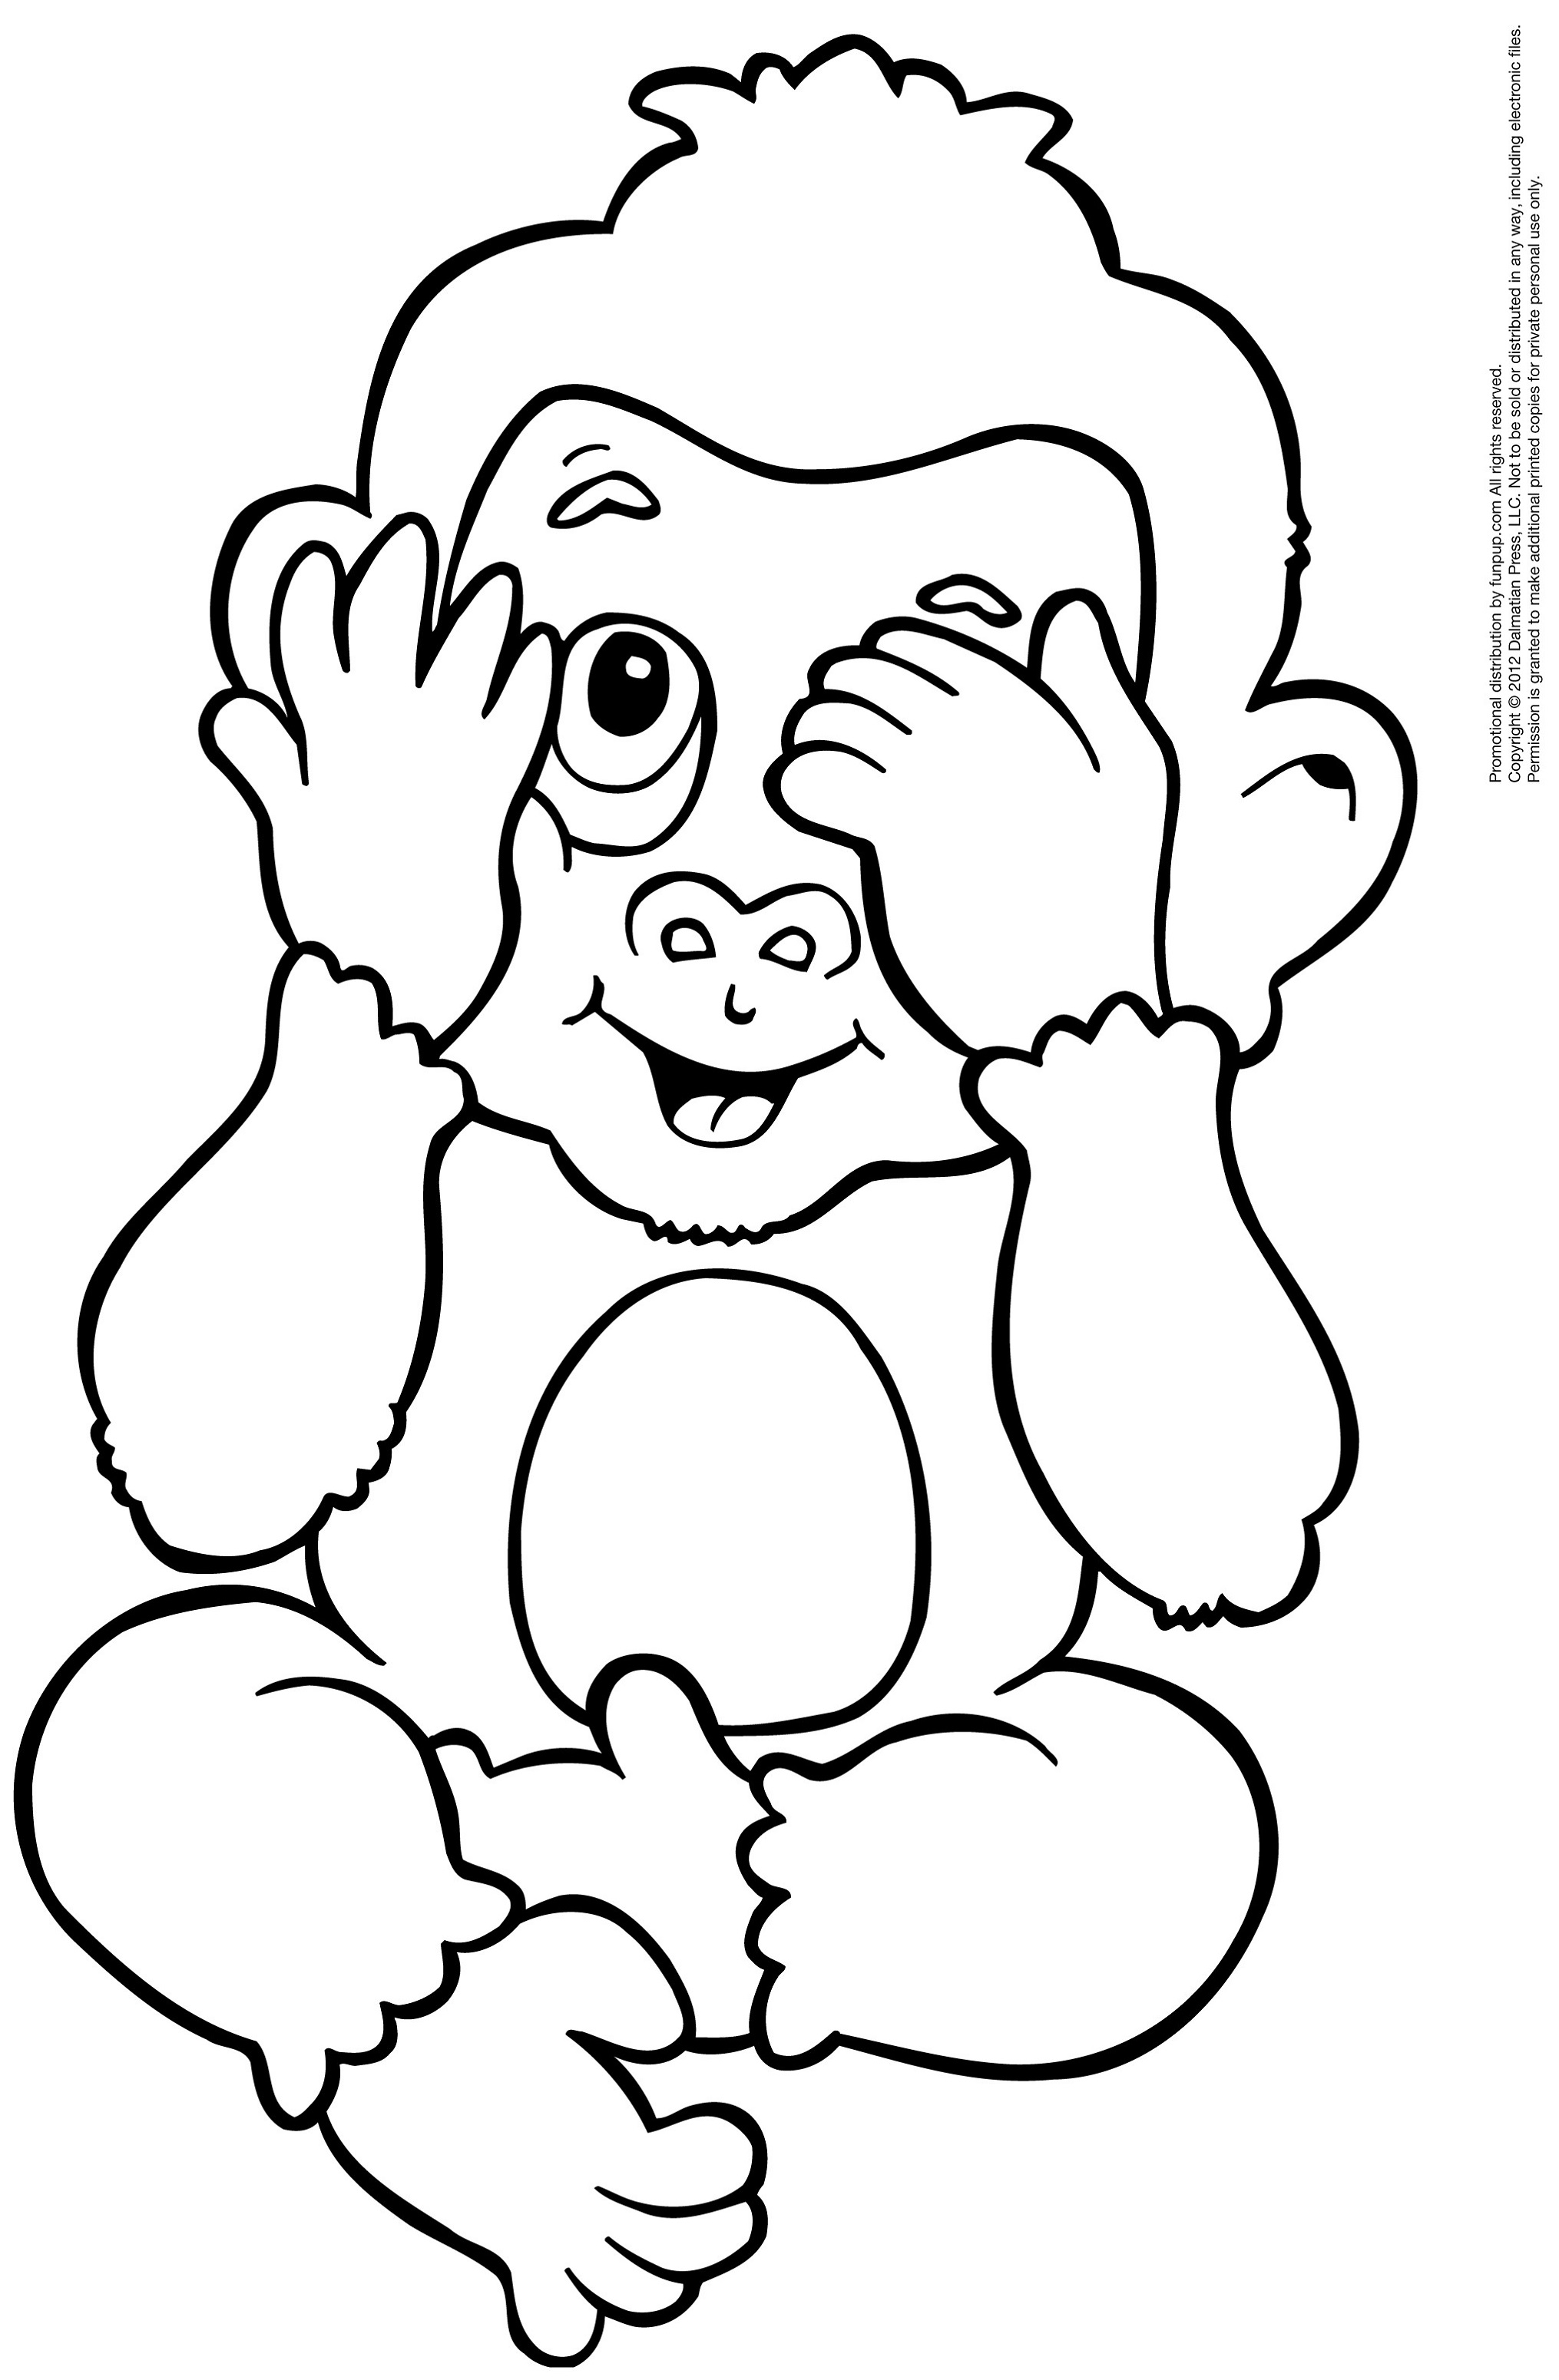 pictures of monkeys to color free printable monkey coloring pages for kids of pictures color to monkeys